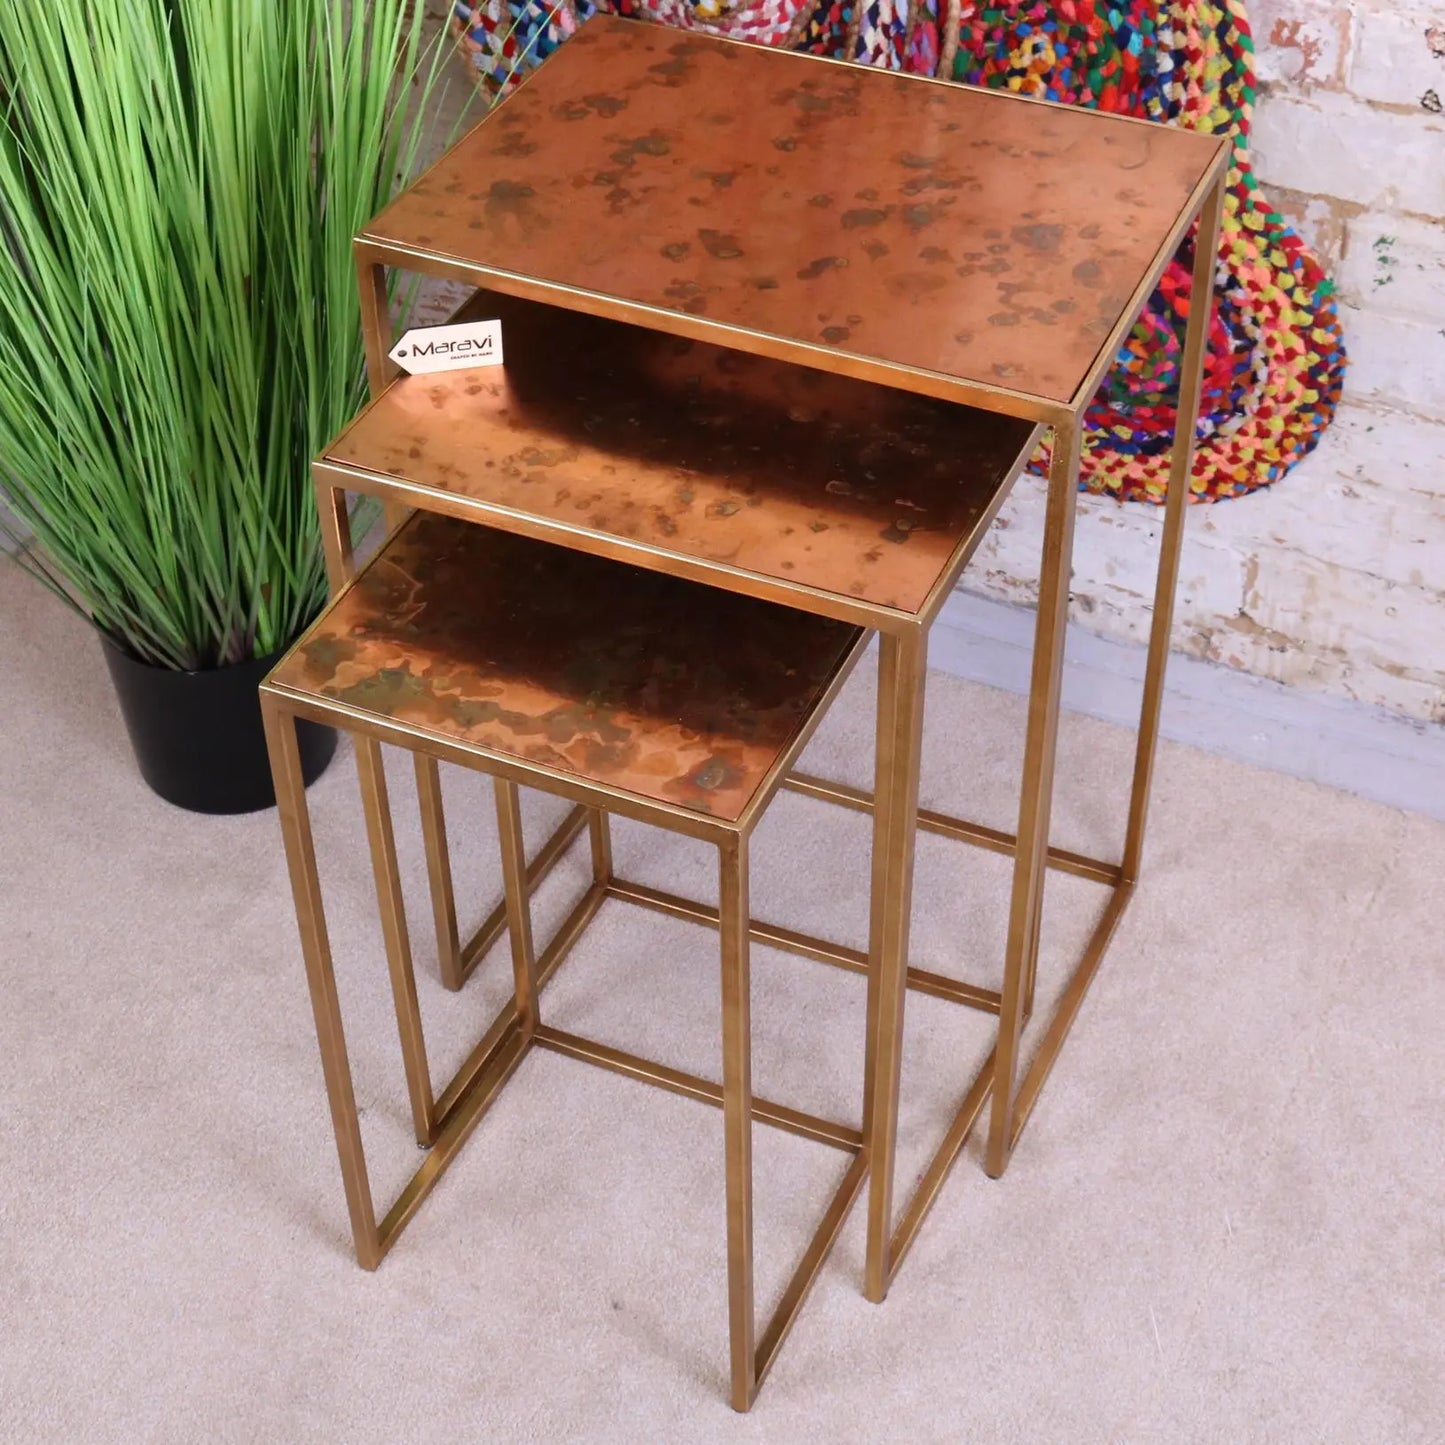 Itawa Tall Nest of Tables Gold Frame and Copper Angled Top View